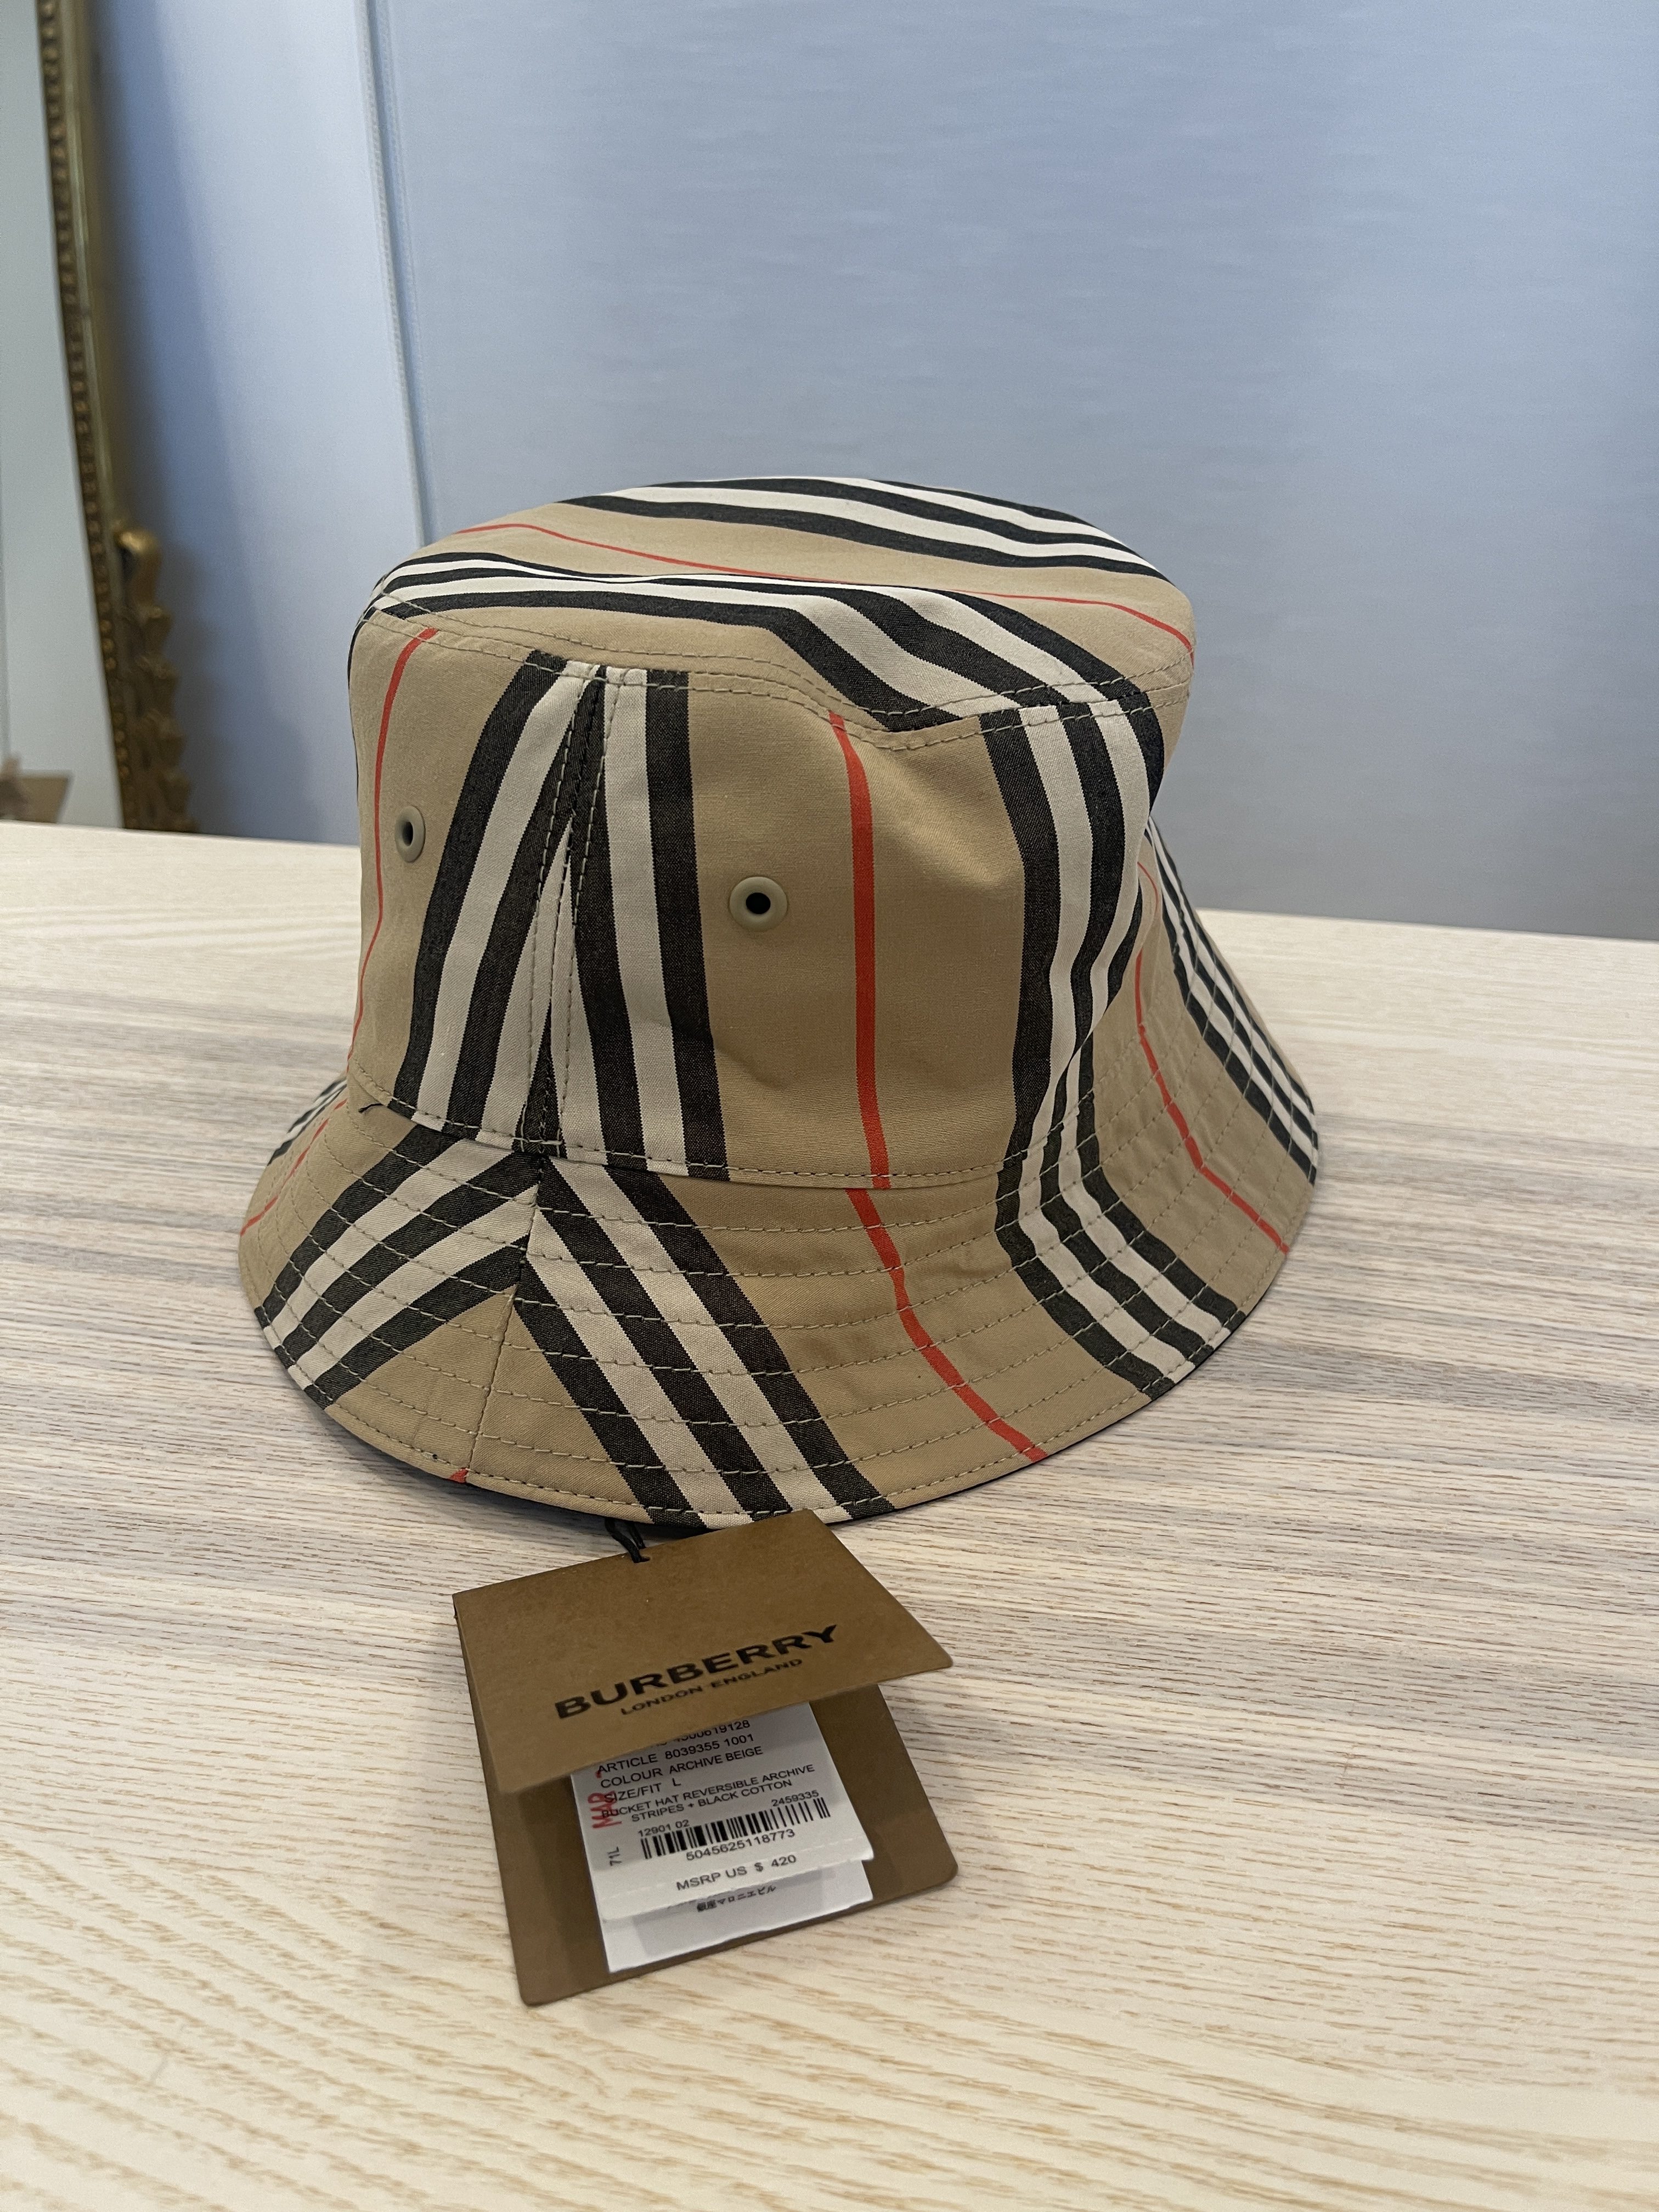 Burberry Vintage Check Bucket Hat Size Large